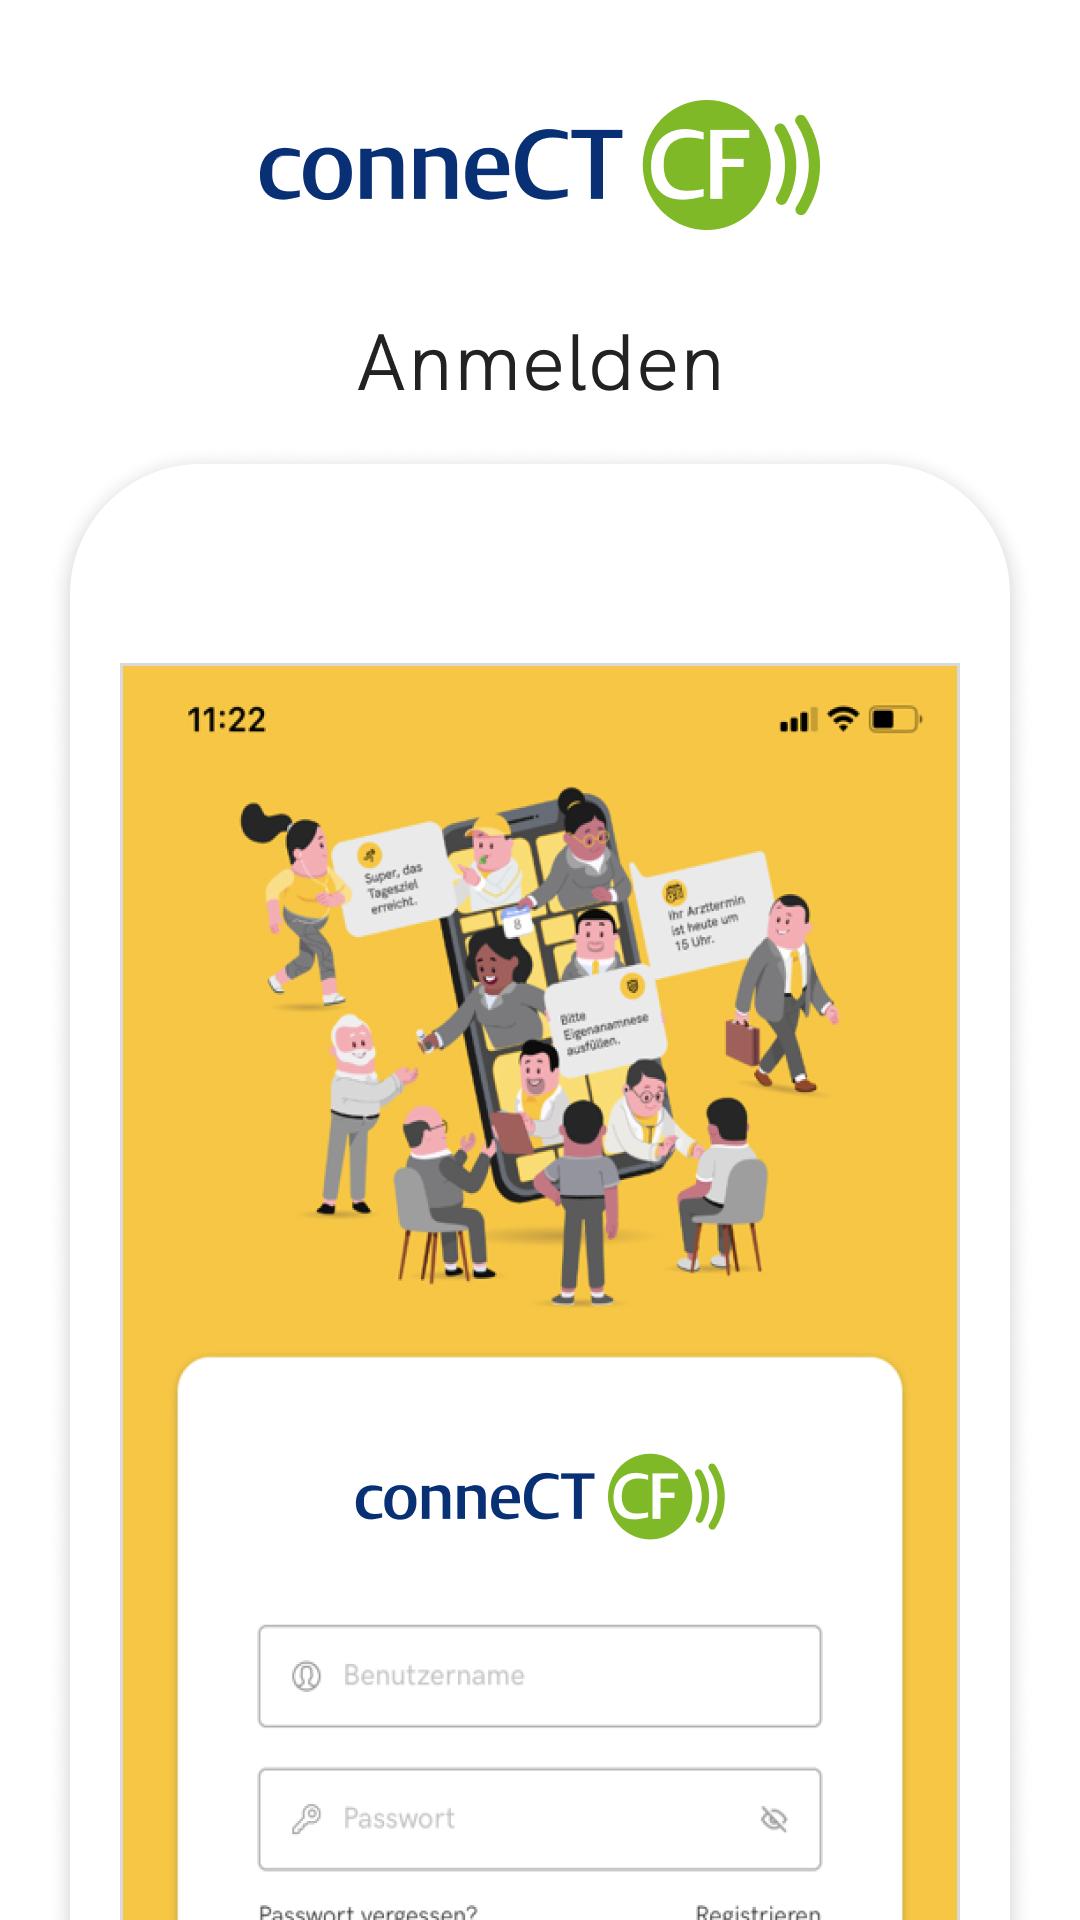 Connect cf